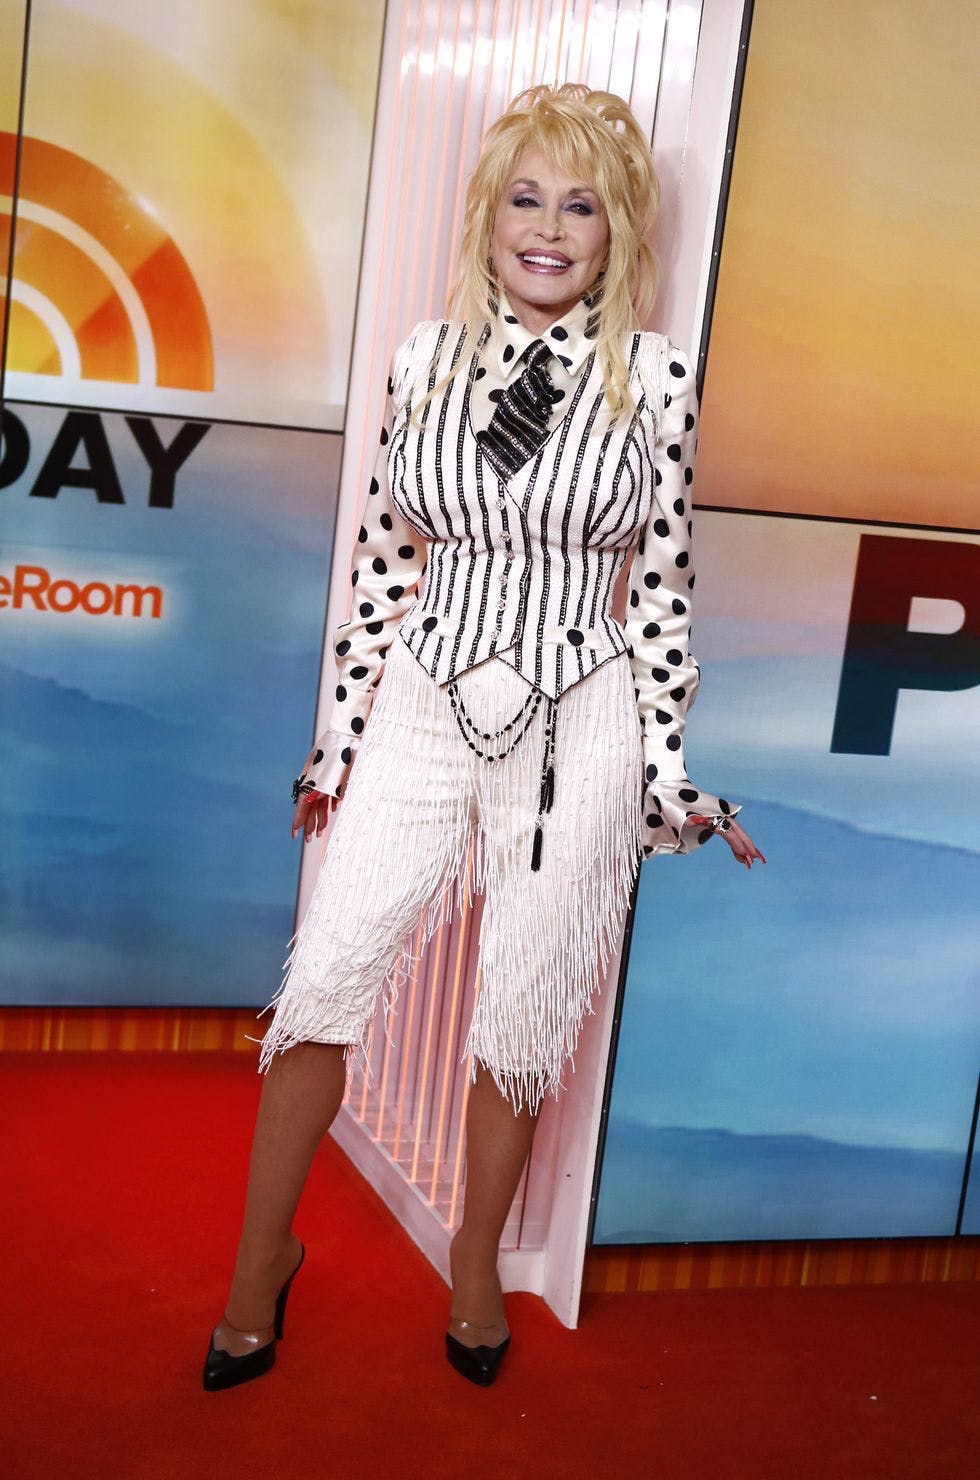 dolly parton in black and white vest, polka dot shirt, and fringe pants